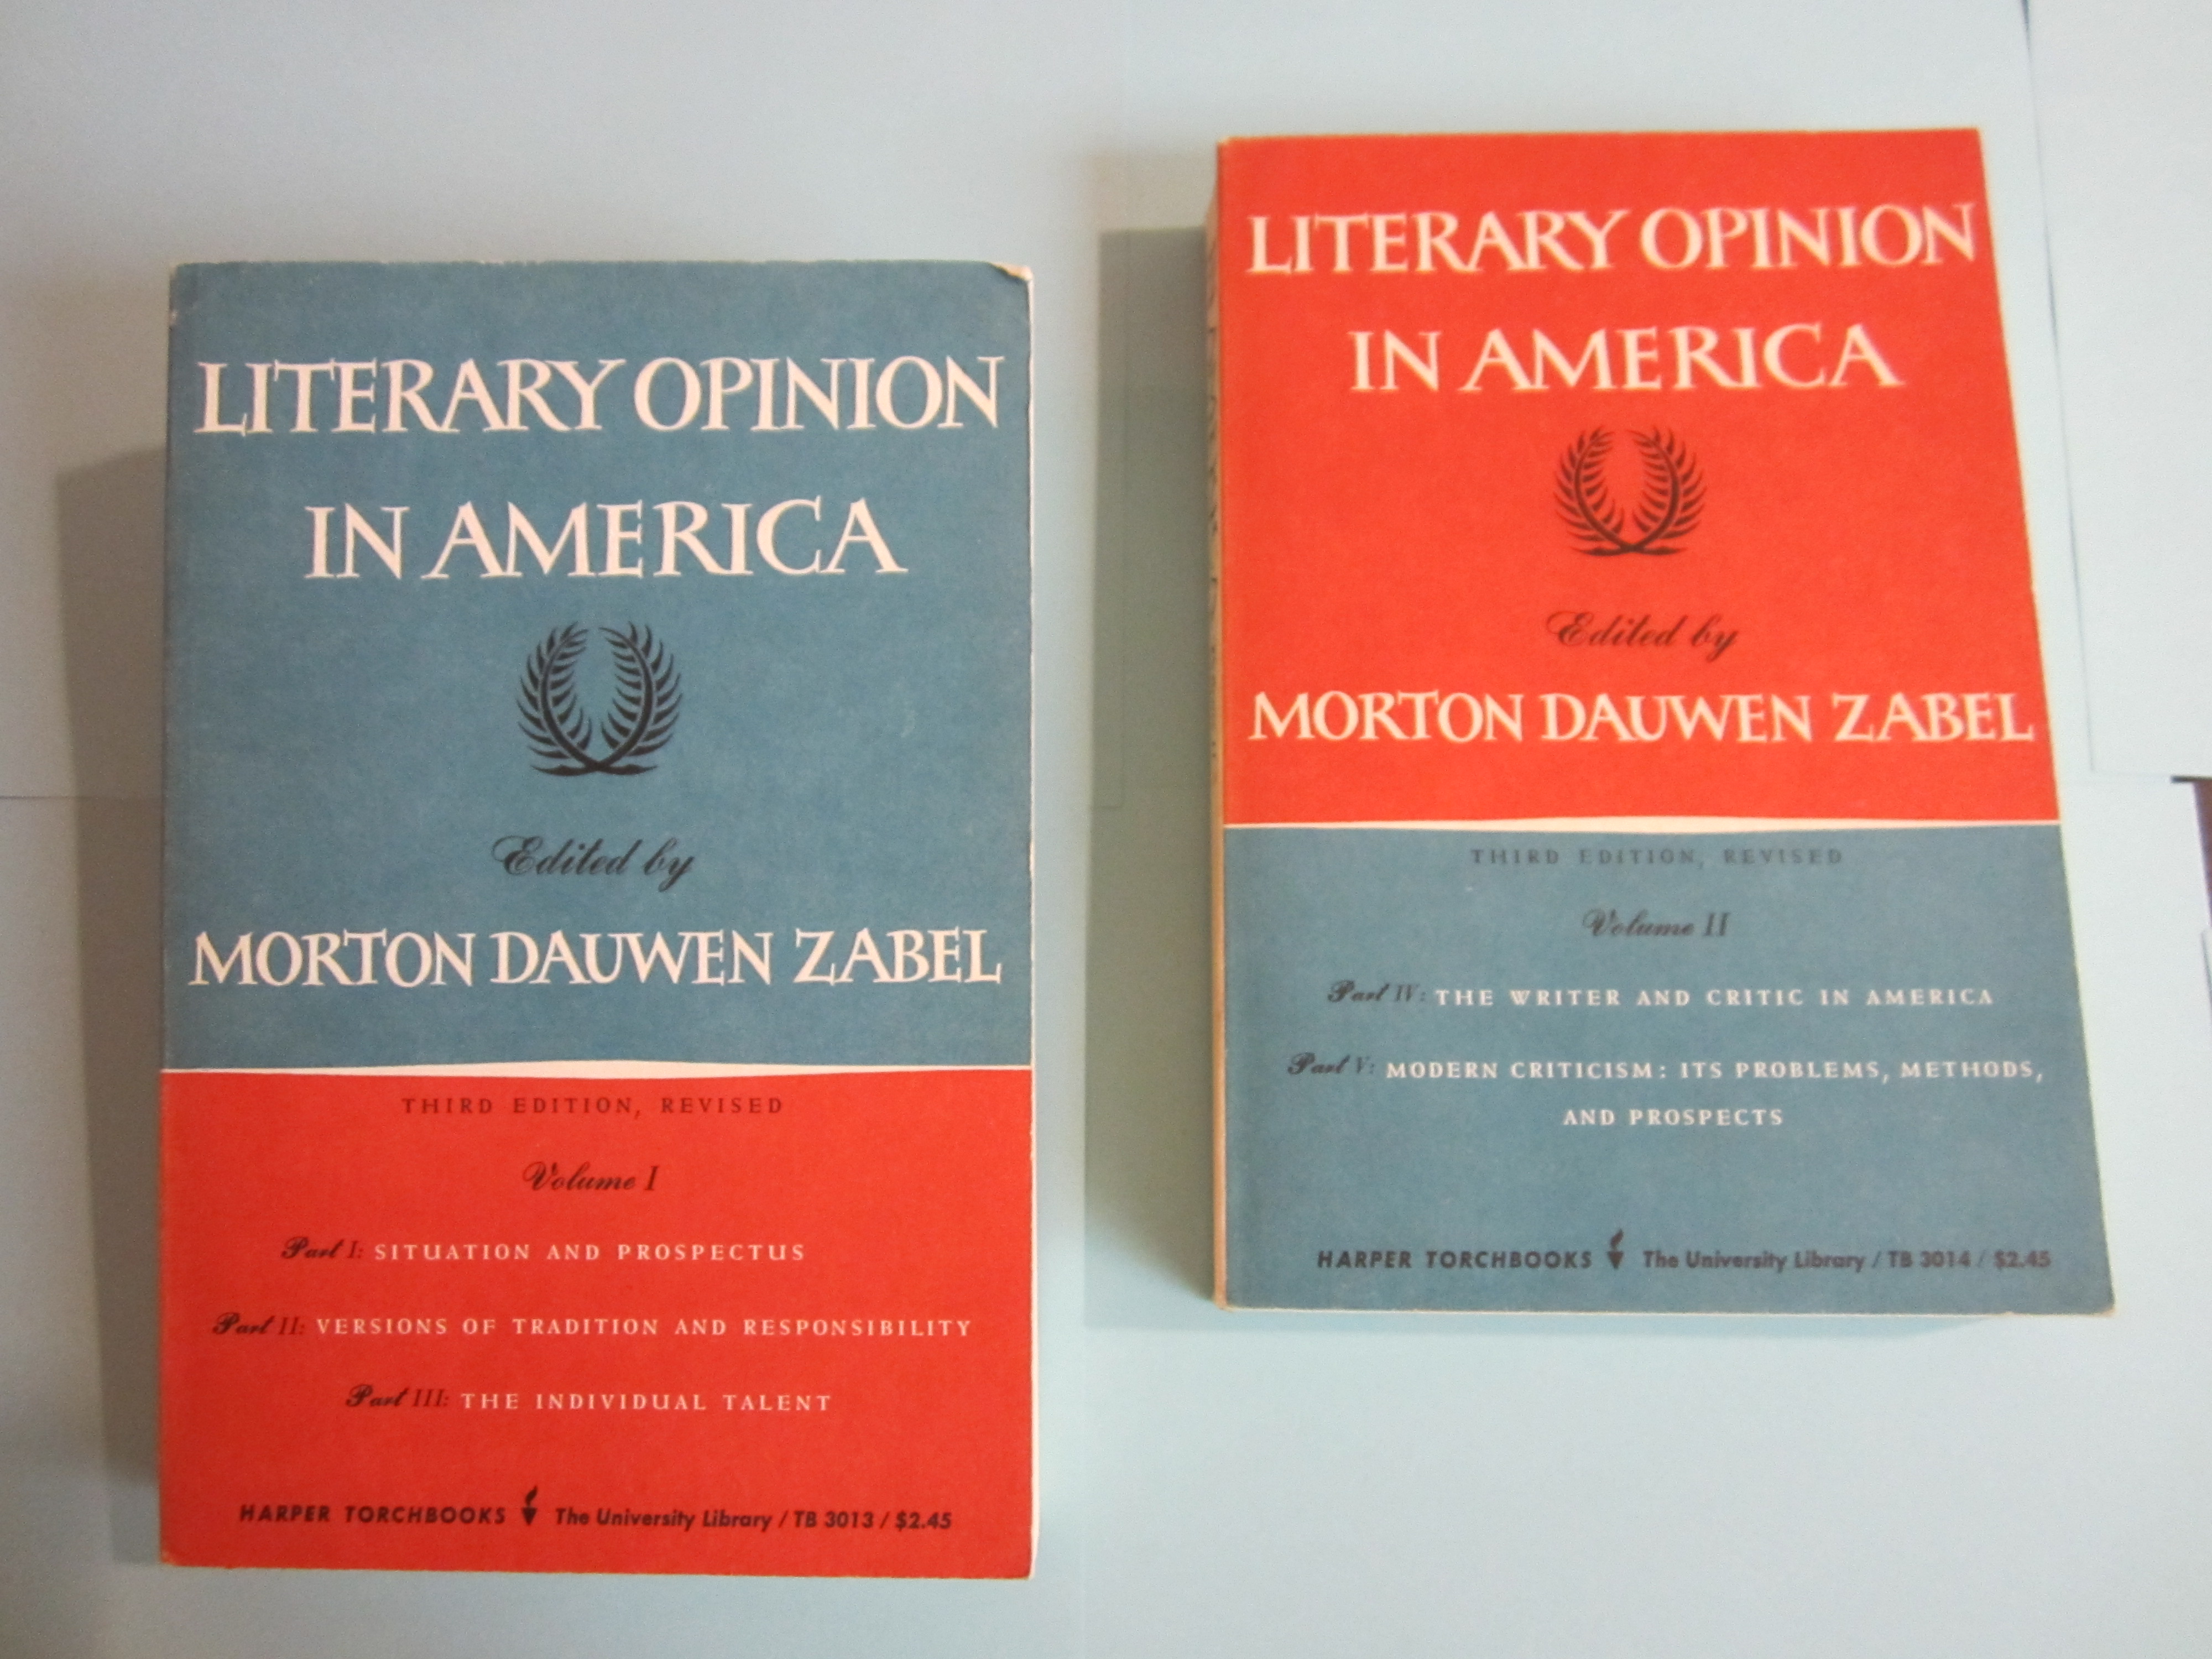 Literary Opinion in America, Zabel’s most notable book, in two volumes (PS 3511 .A86 Z8525 1962 edition. Photograph by Donna Stapley)